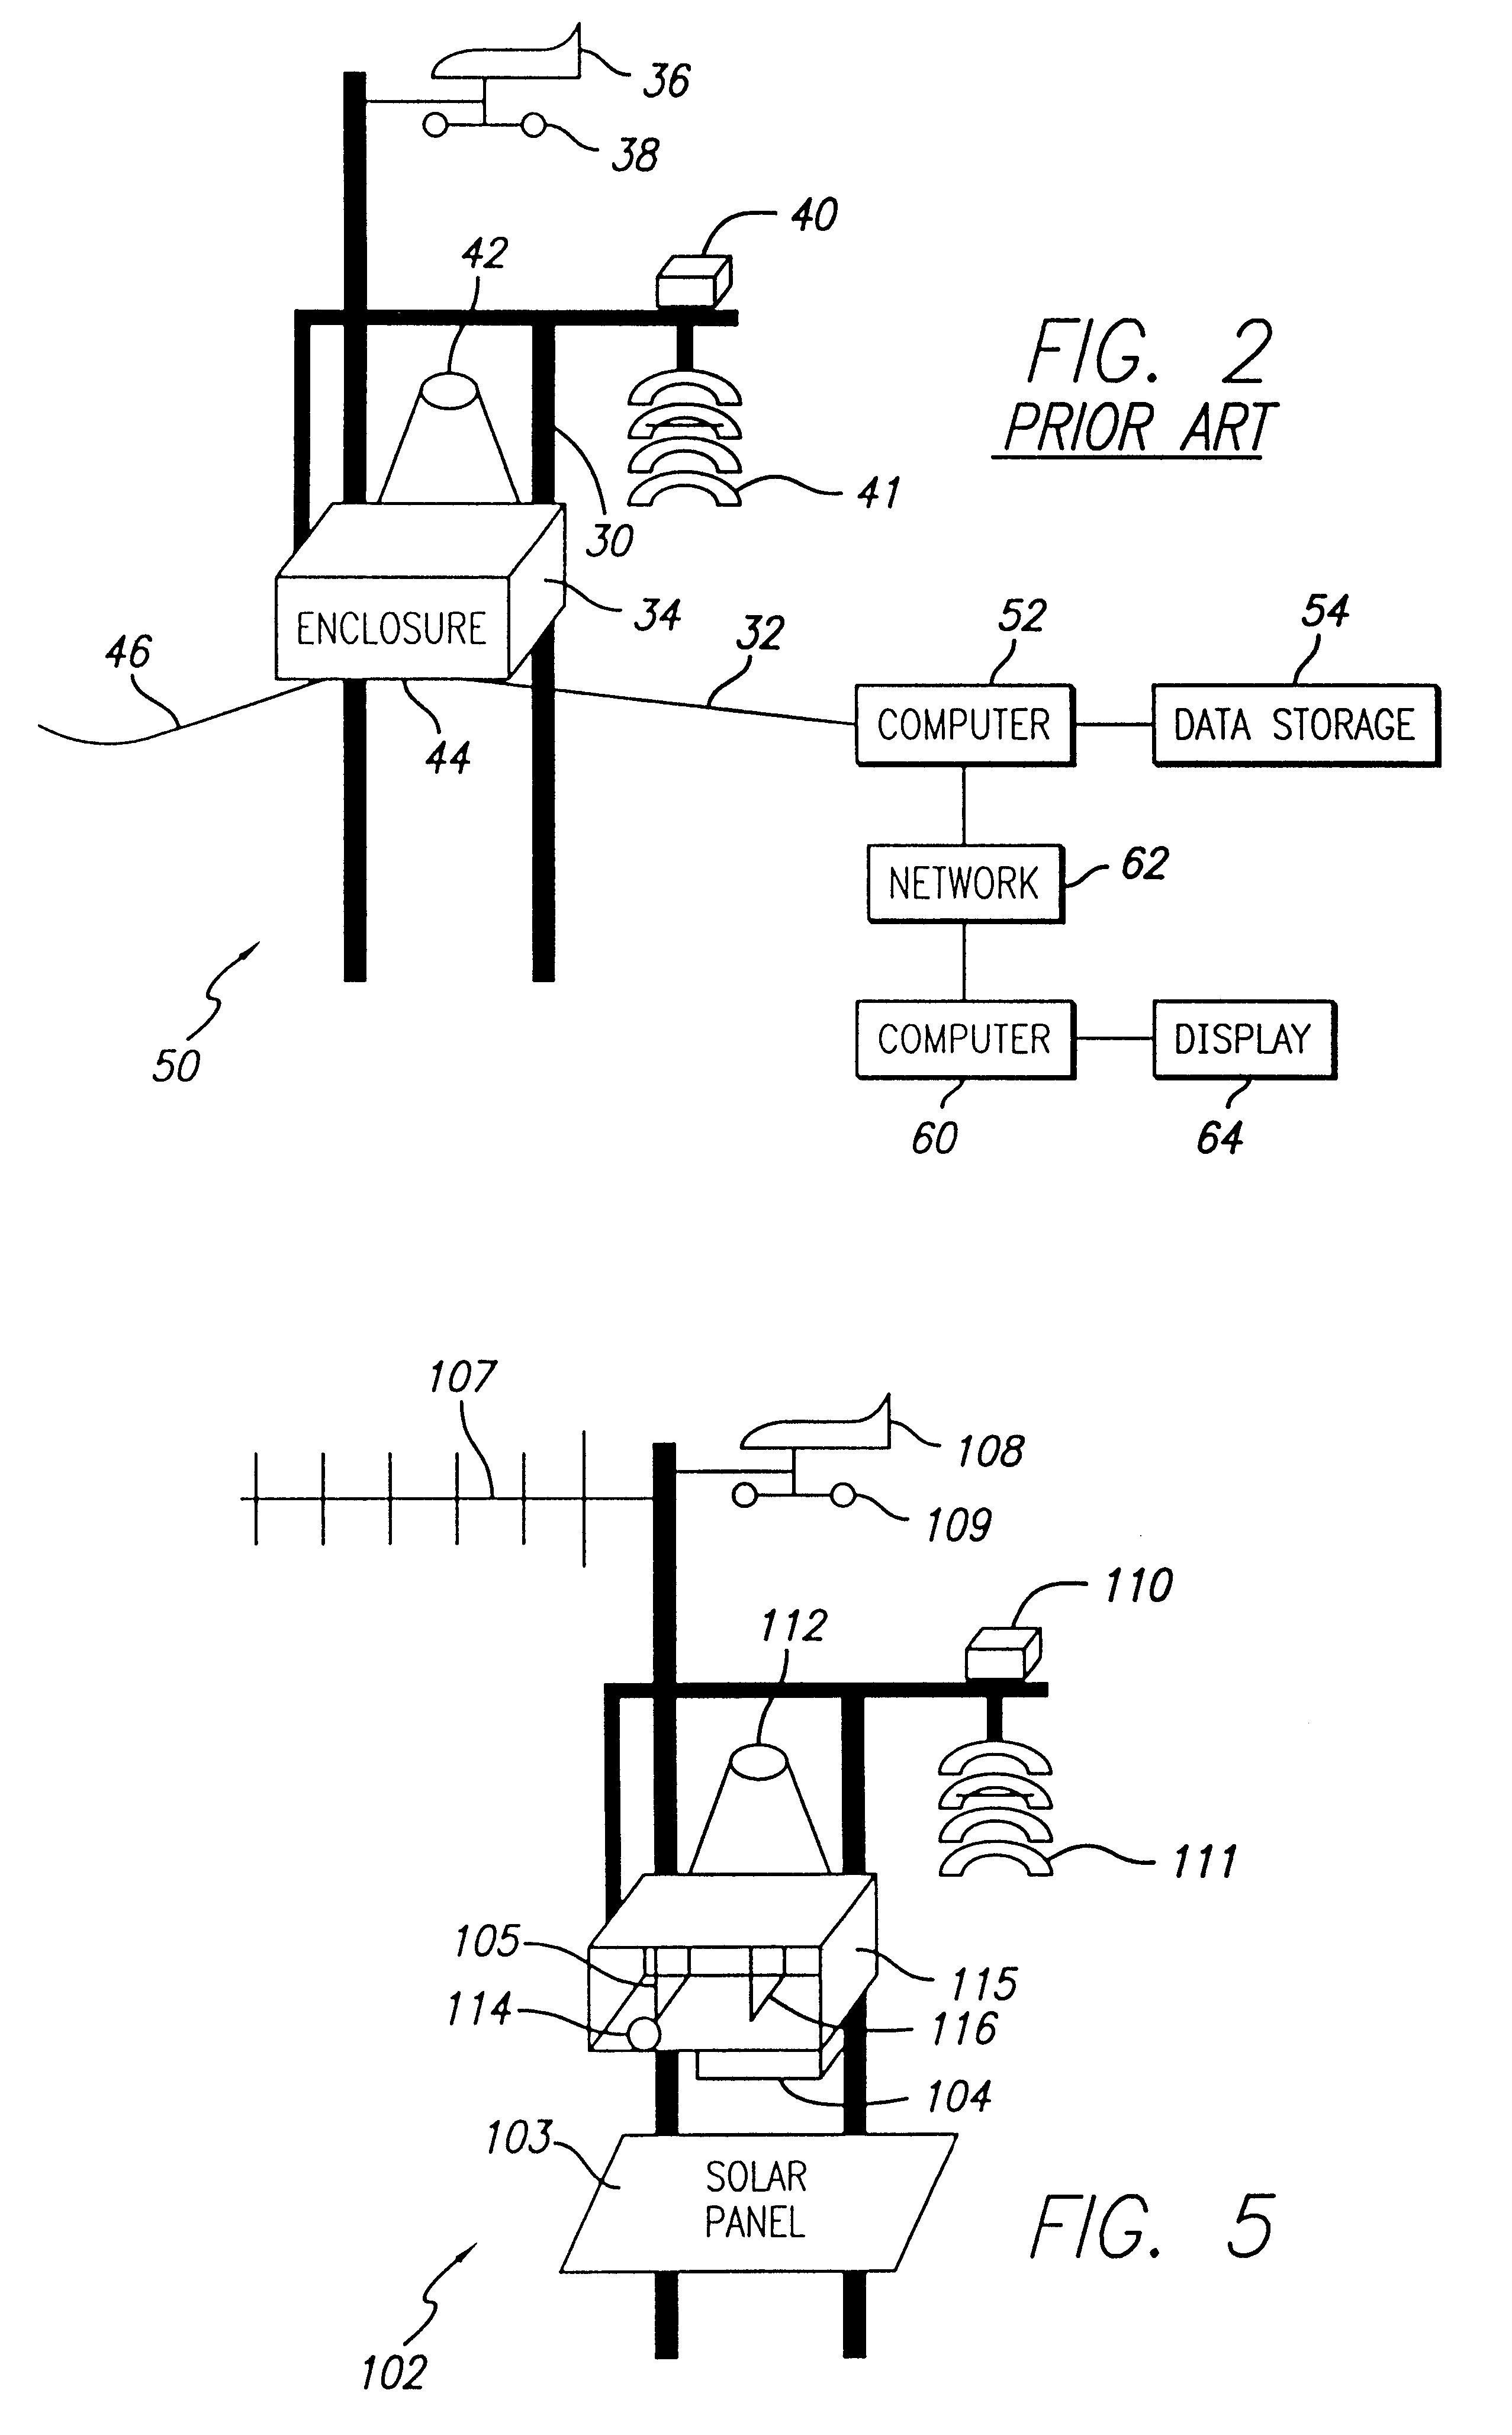 Cellular weather station and computer system using the public cellular data telephone system and internet for controlling irrigation and method of use